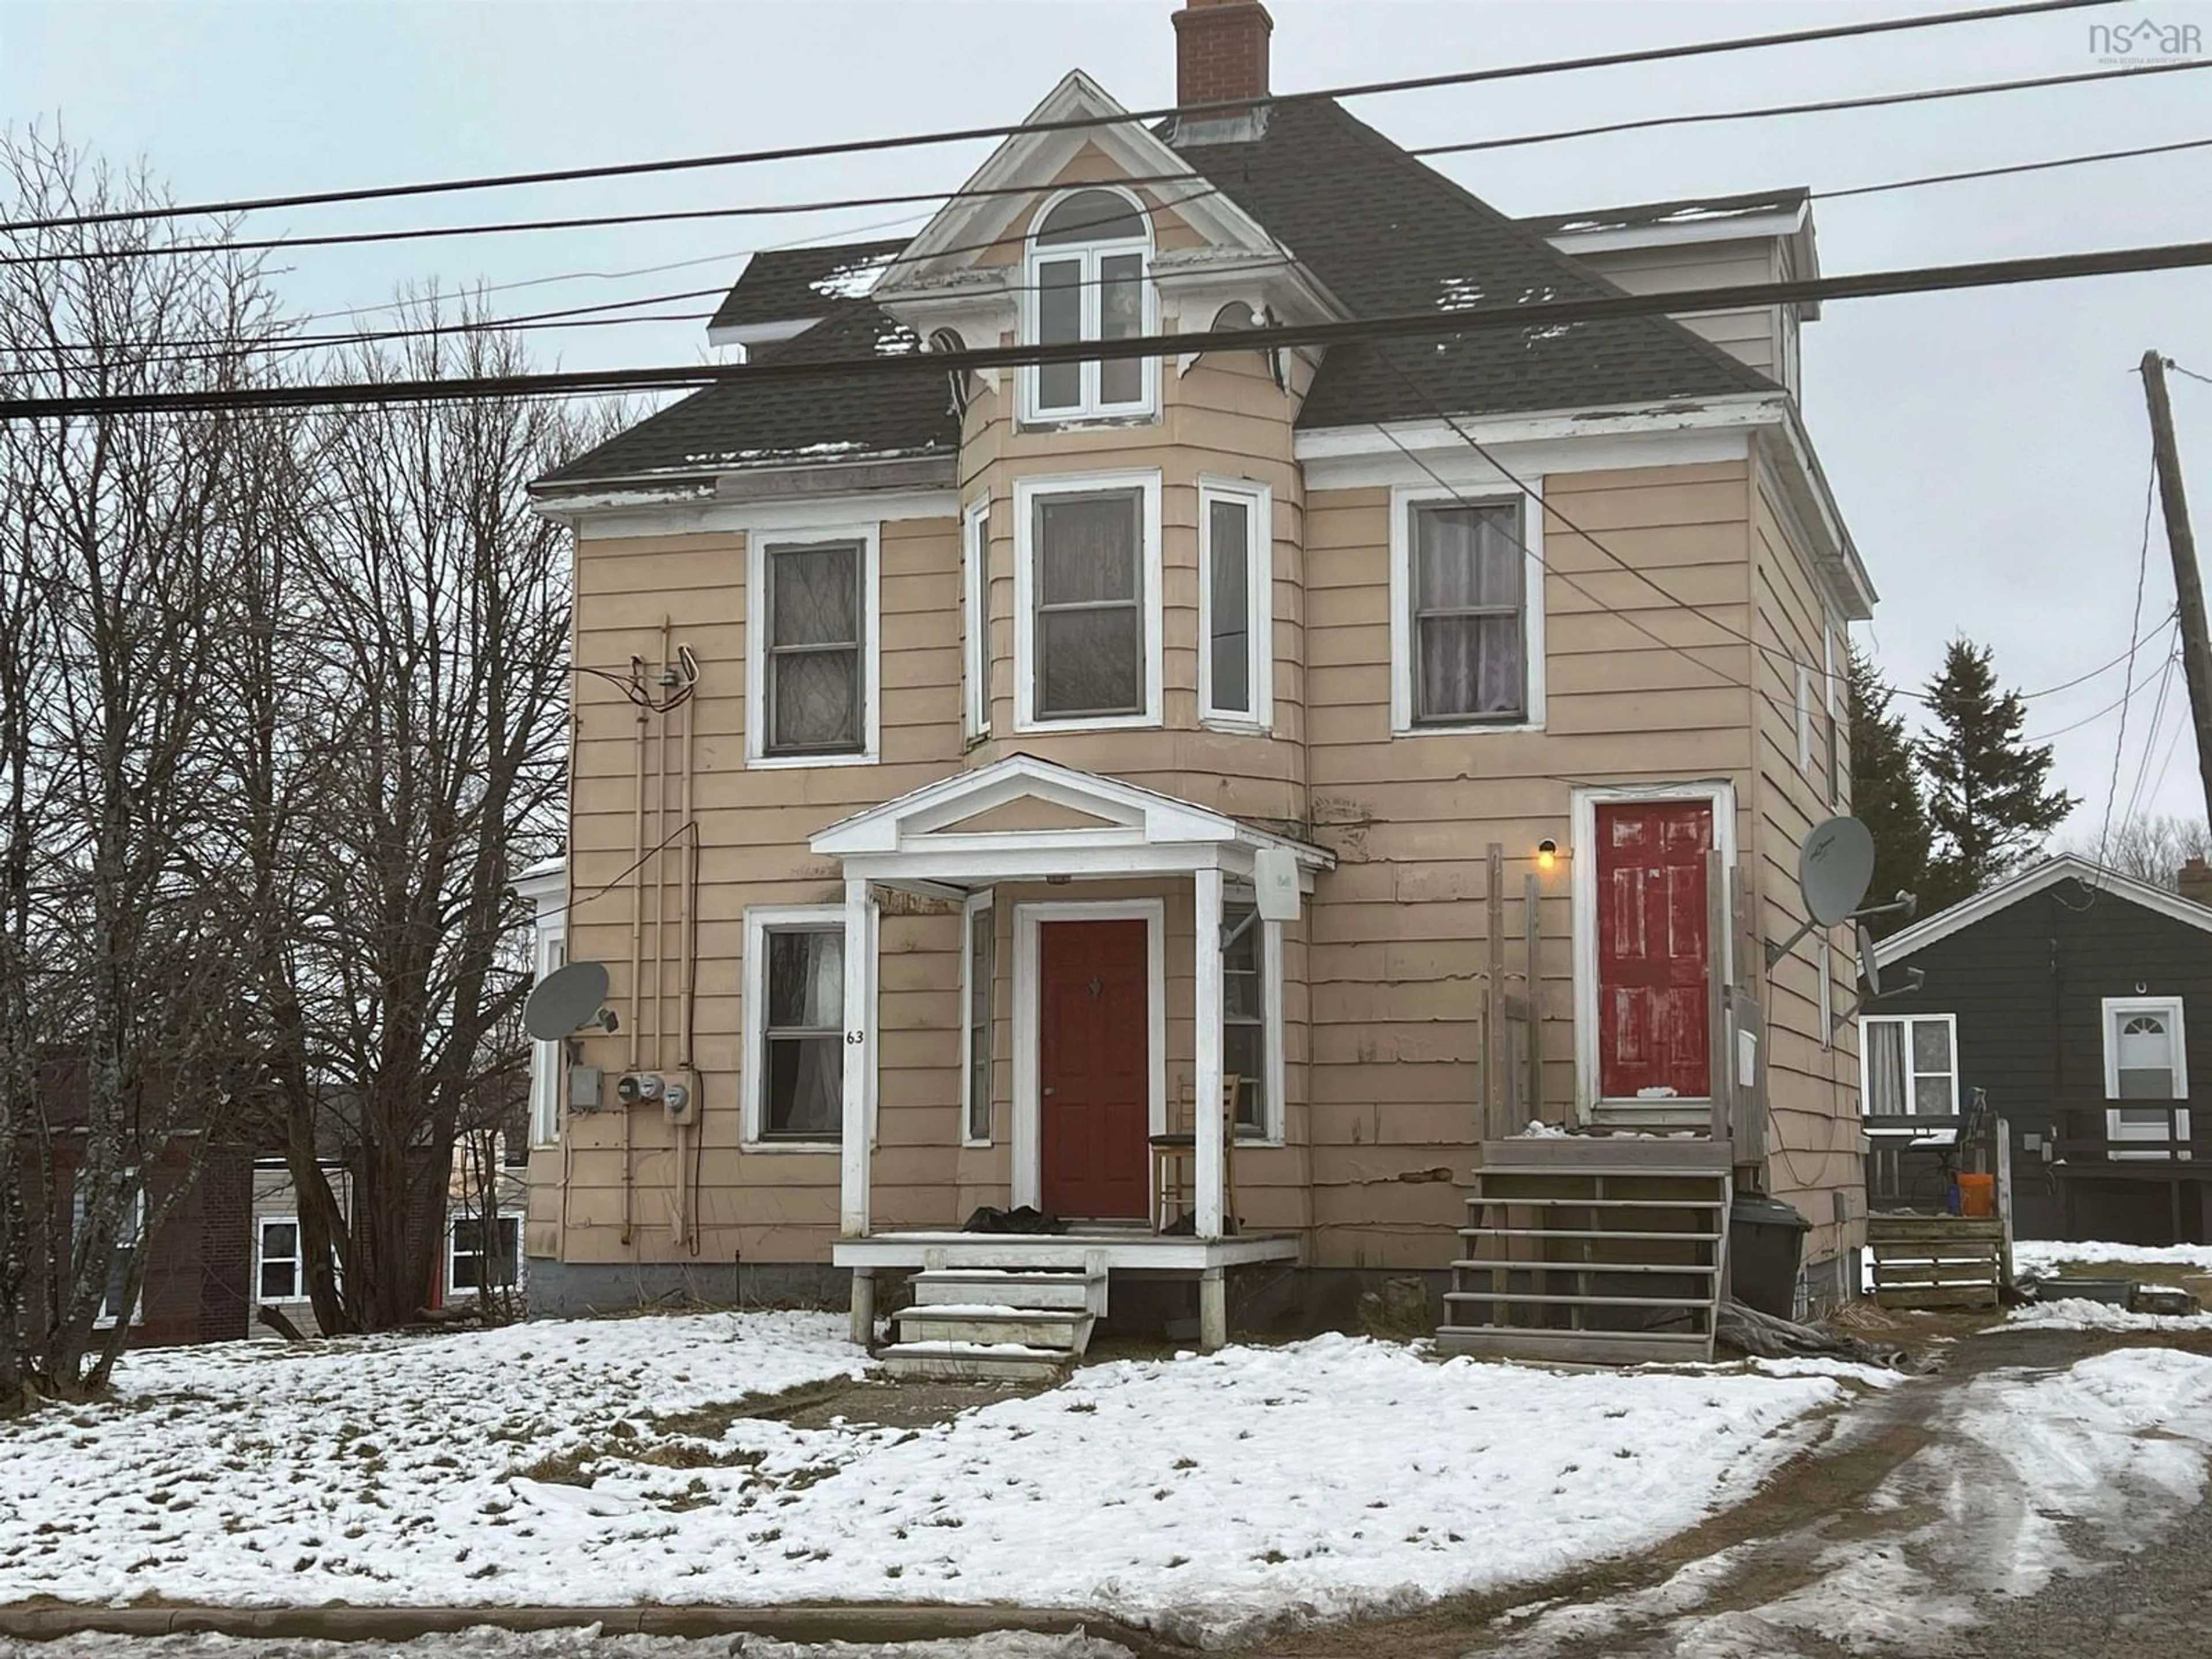 Home with unknown exterior material for 63 King St, Sydney Mines Nova Scotia B1V 1L7